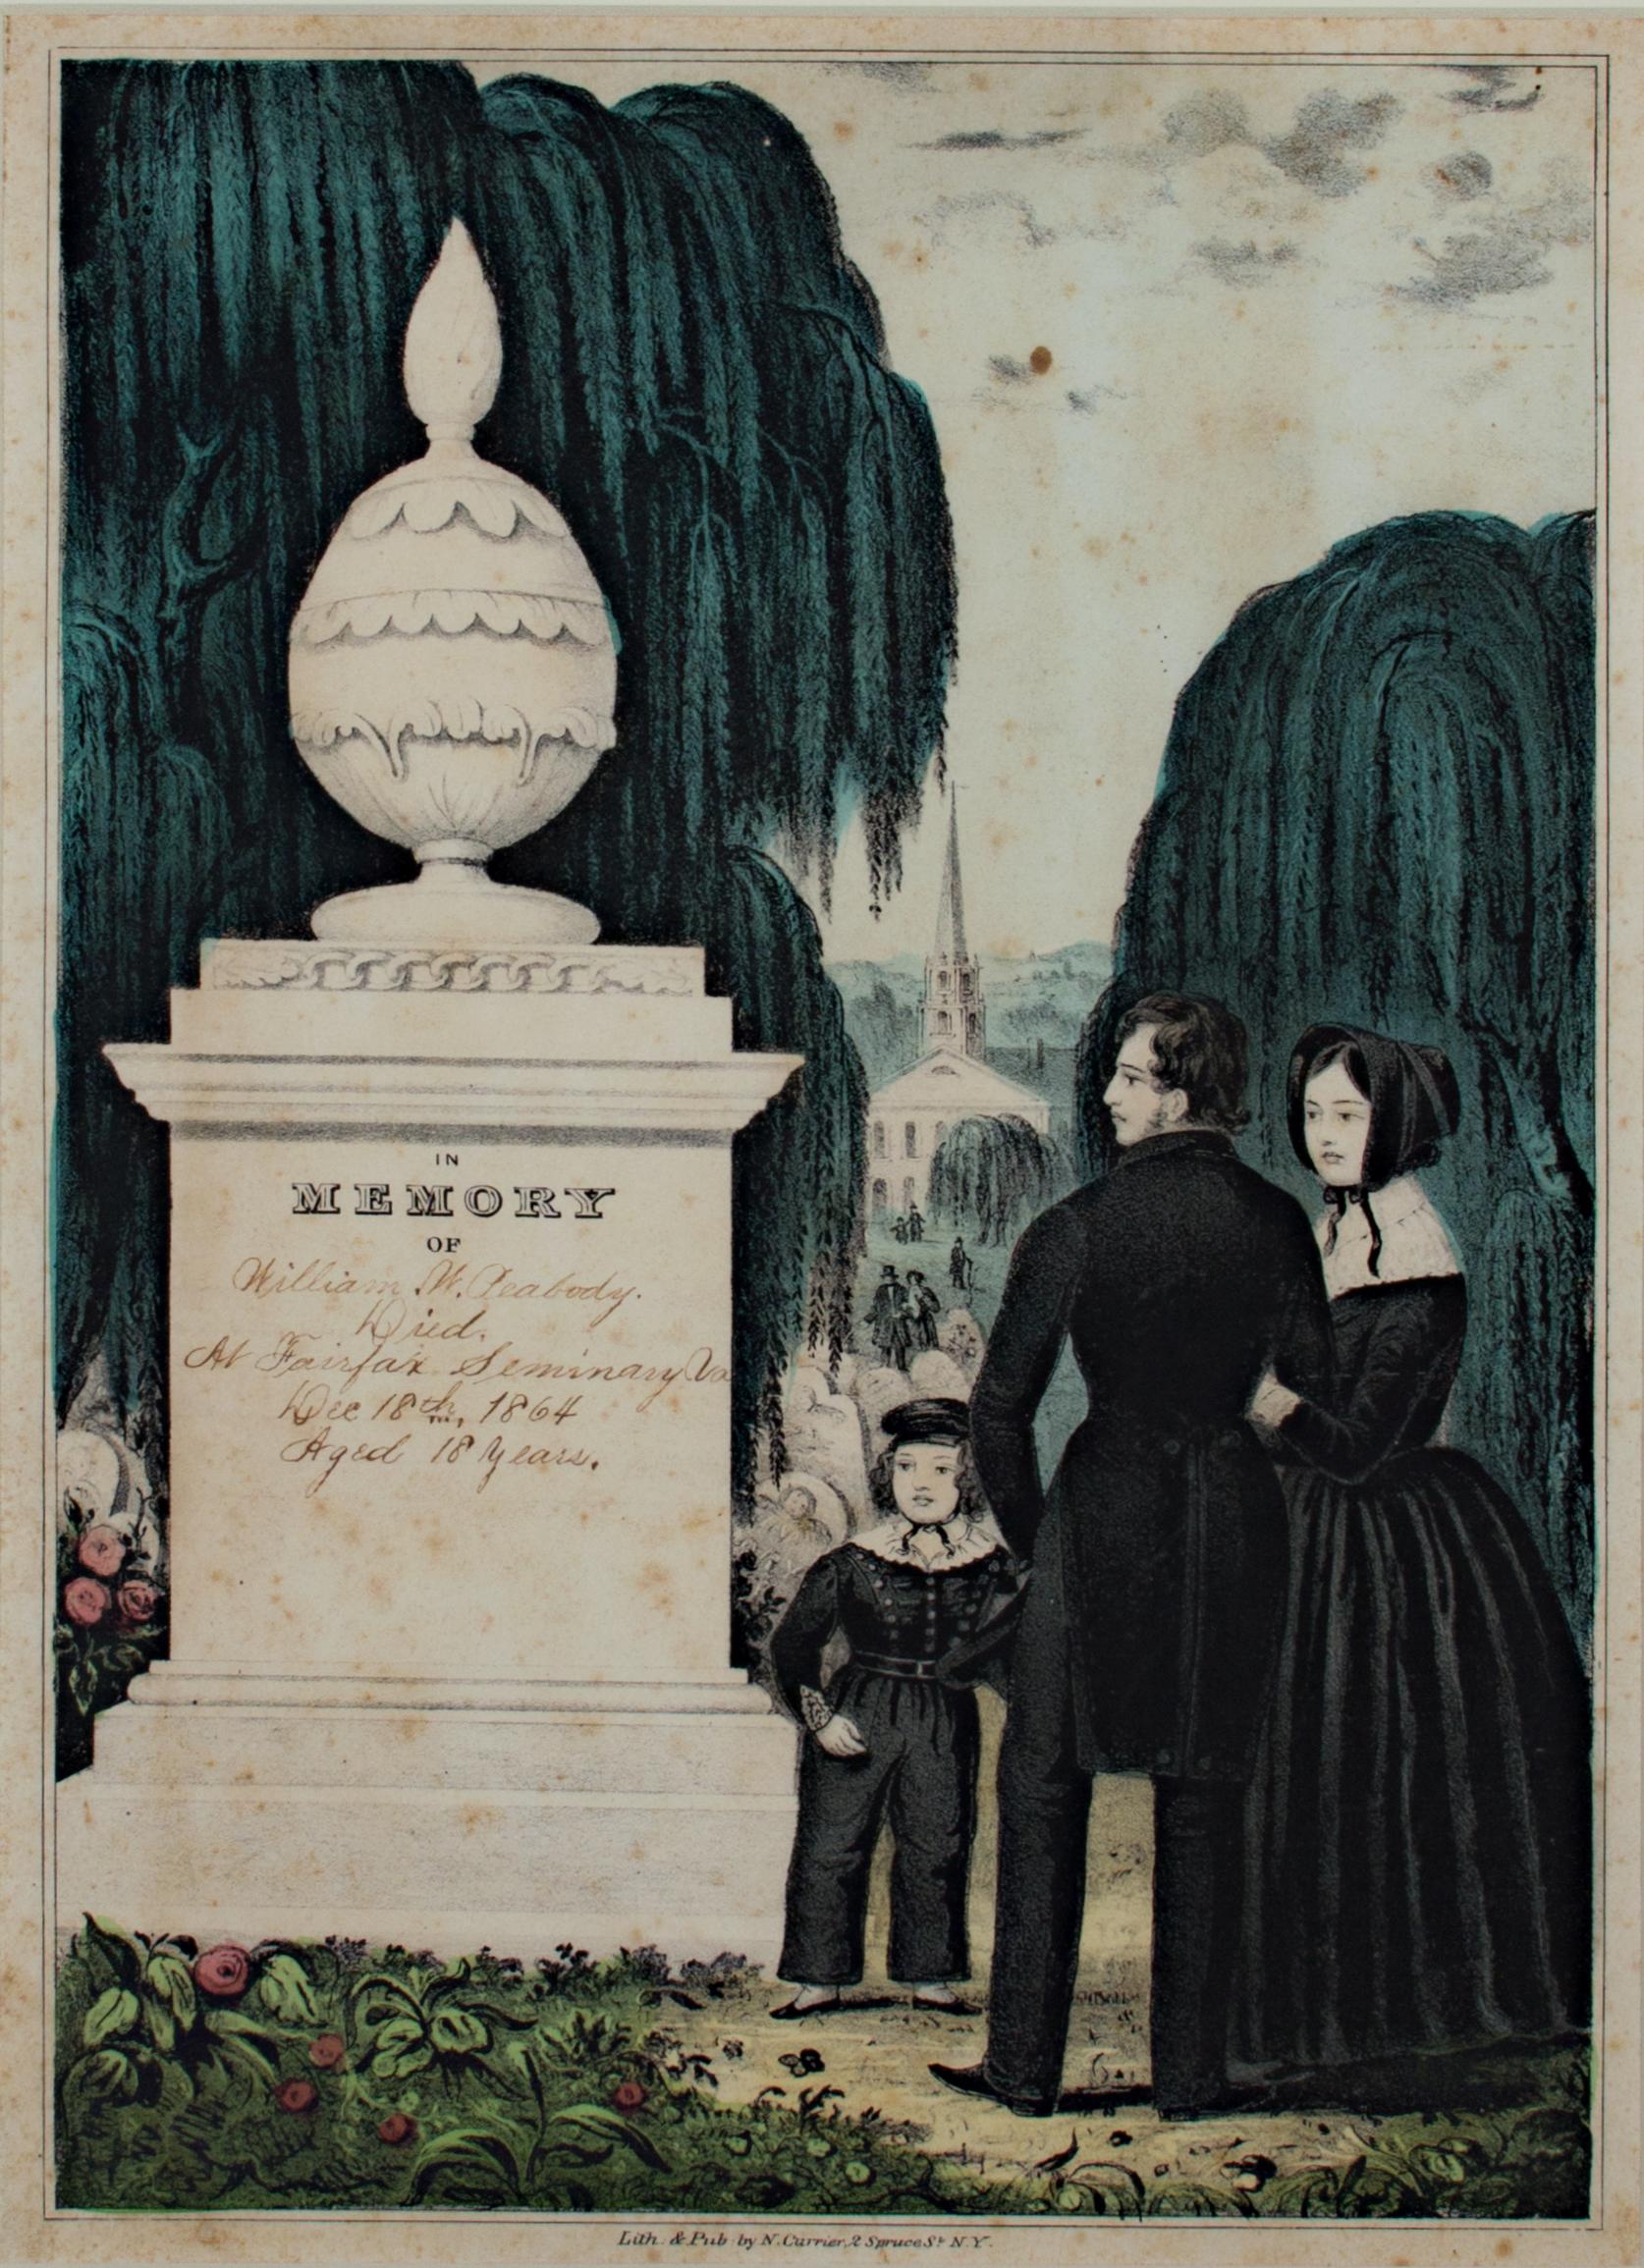 'In Memory of William W. Peabody' original hand-colored lithograph by N. Currier